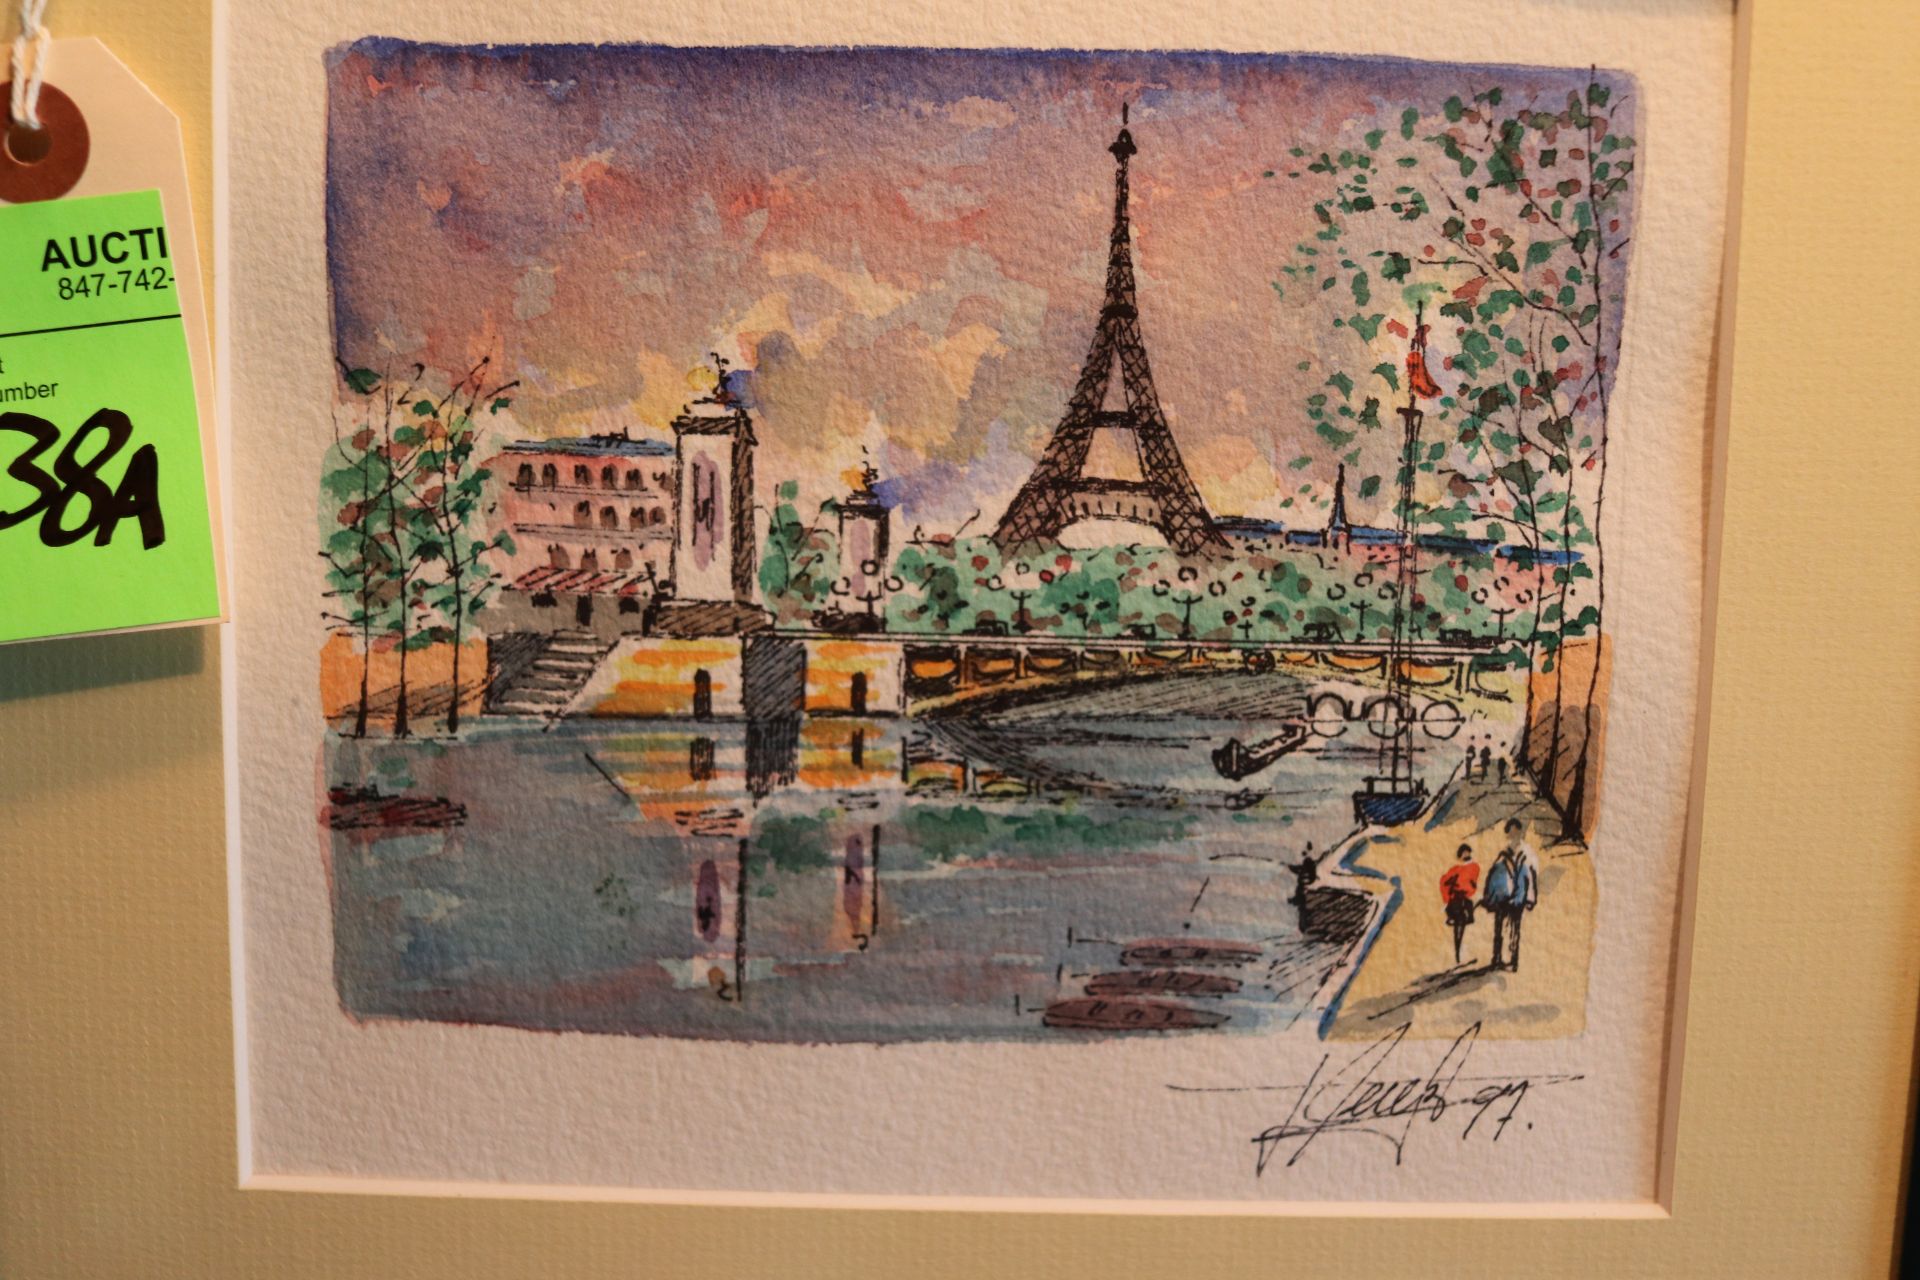 Framed artwork depicting Paris canal, watercolor on paper, signed and dated by artist, unknown artis - Image 2 of 3